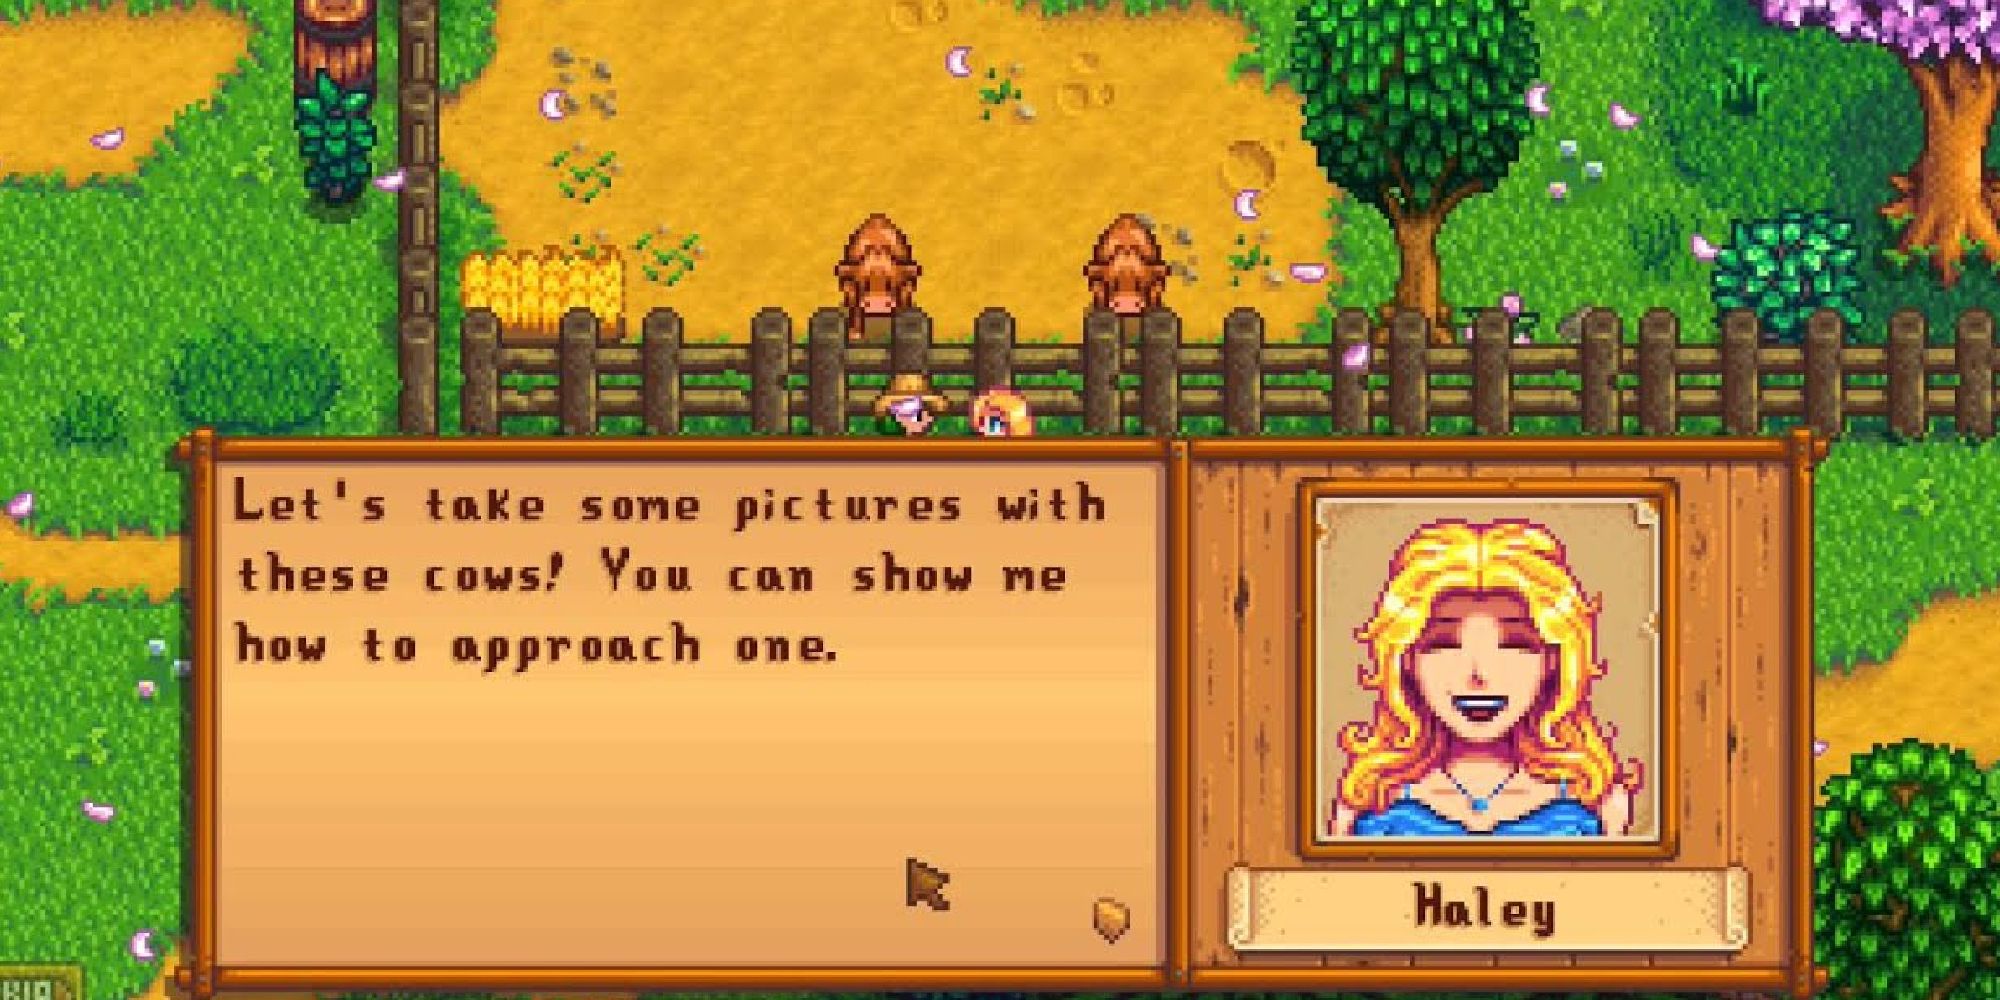 haley and player talk about a photo of cows